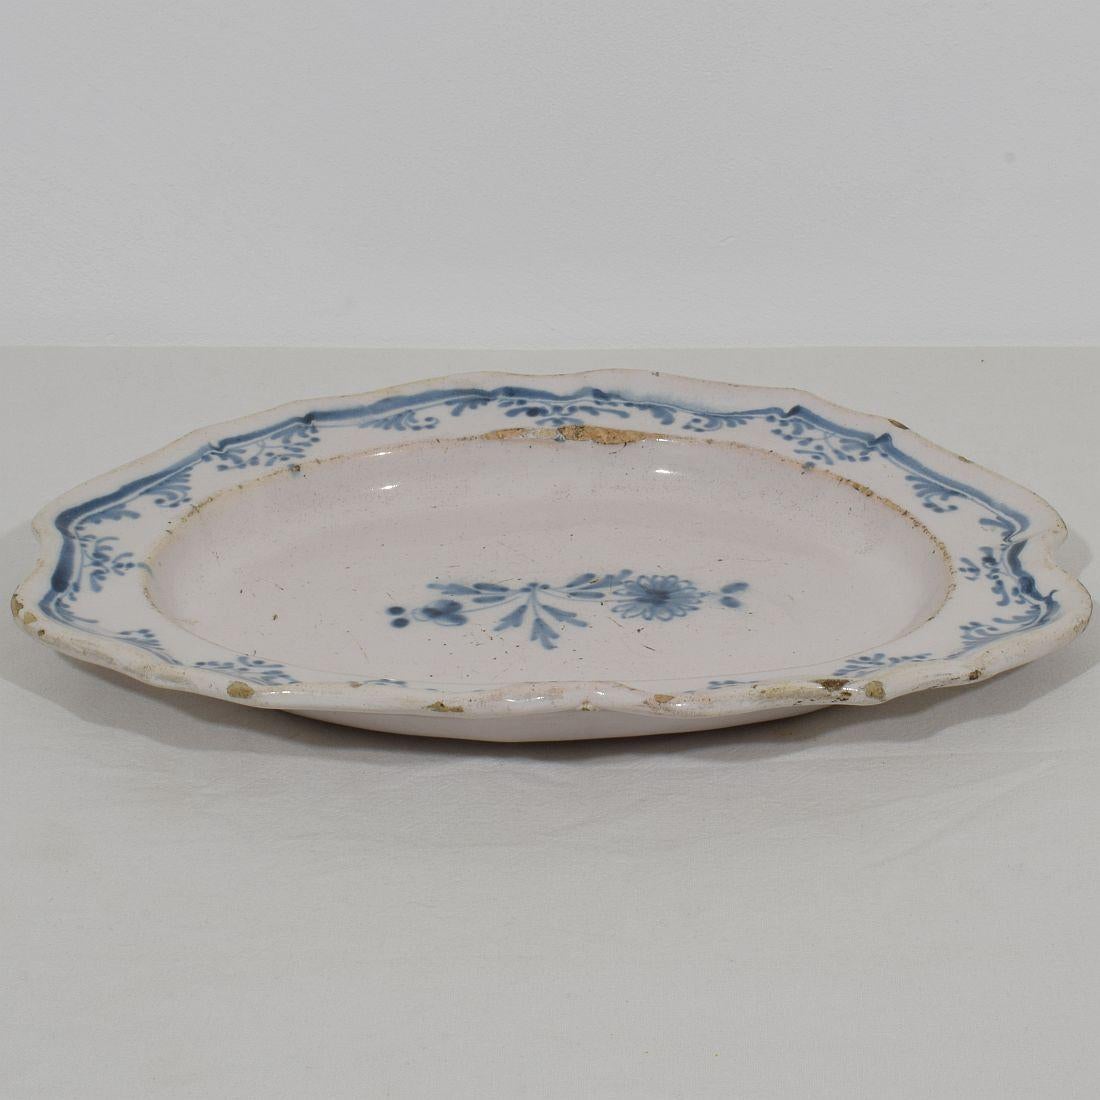 French, 18th Century Glazed Earthenware Rouen Platter For Sale 6